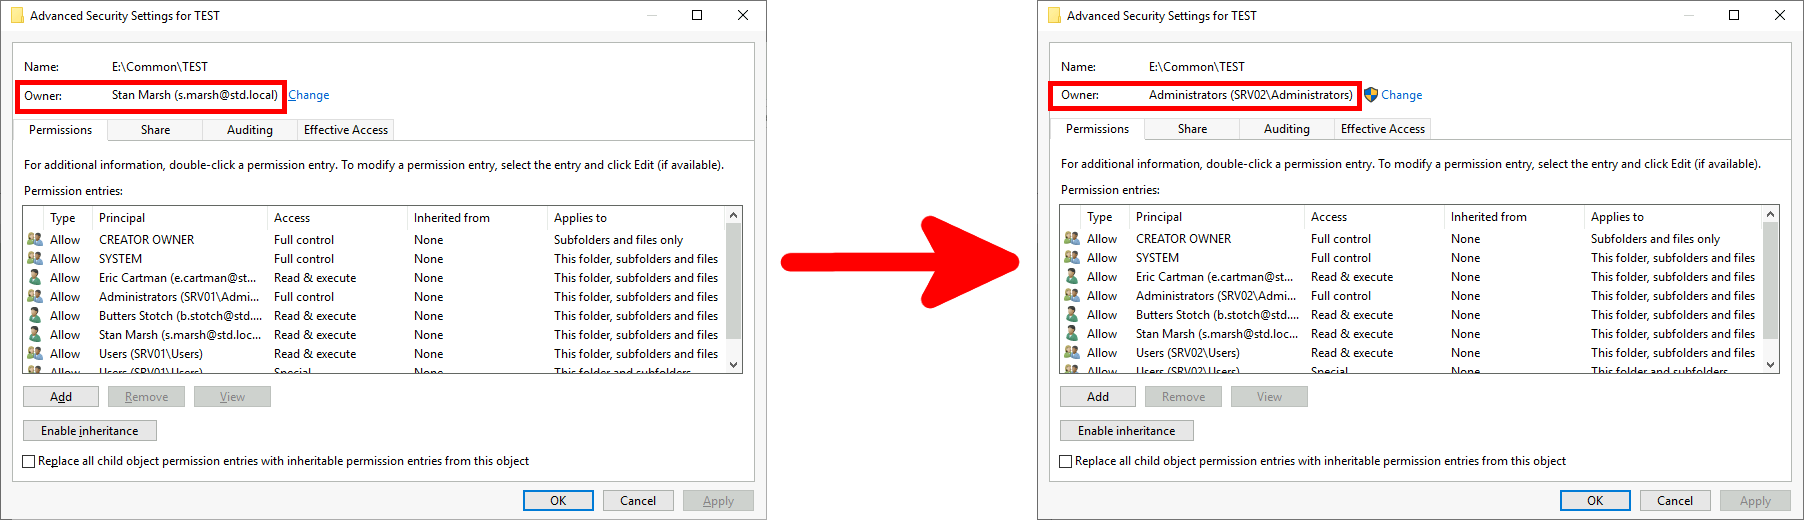 before and after comparison of two advanced security settings windows with takeown modifications